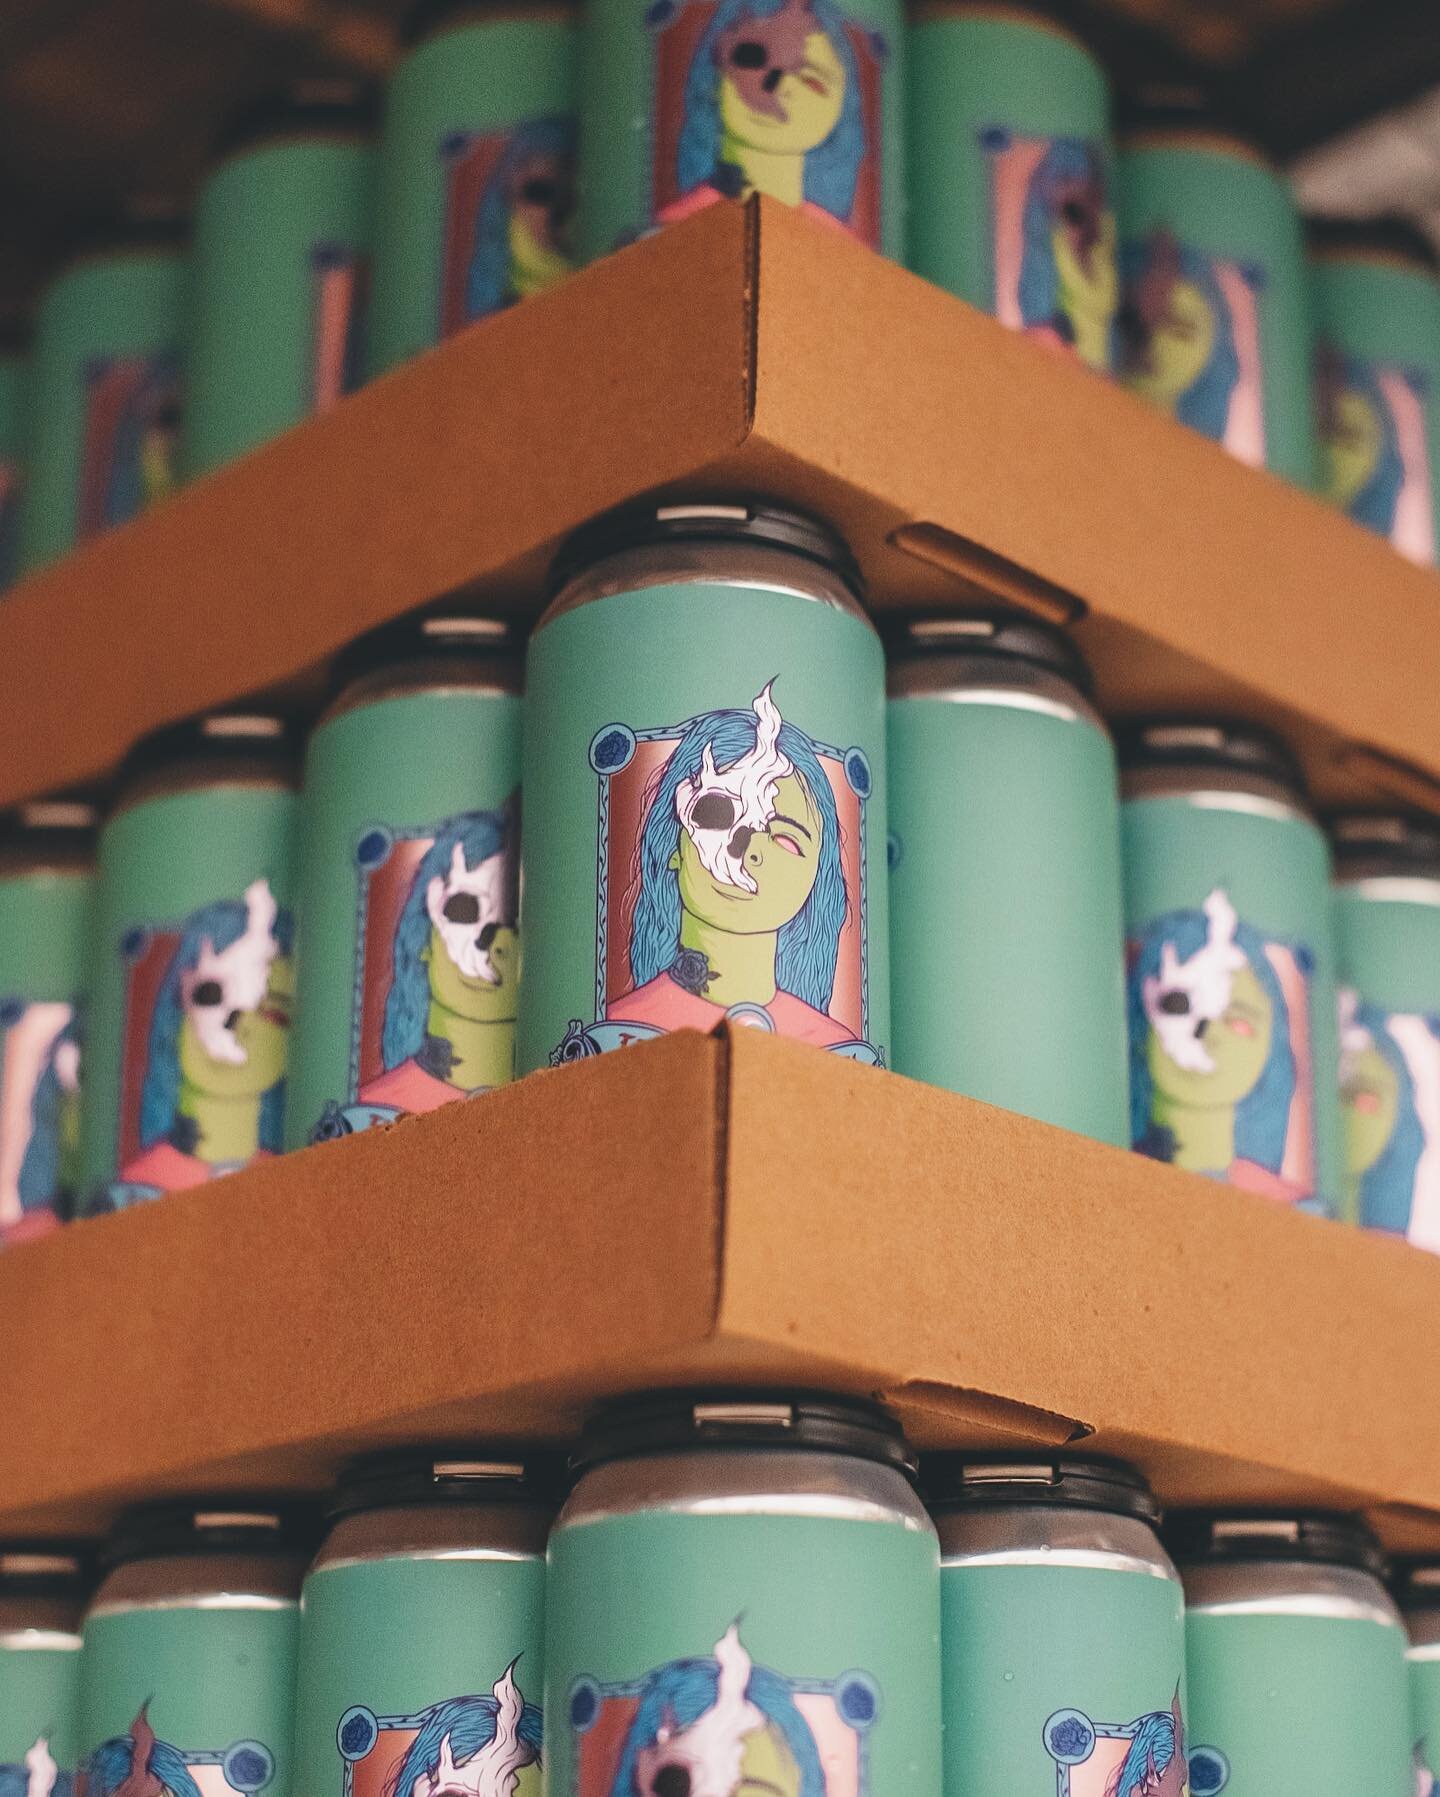 Returning this weekend 🔥

This Is All We Know: our sticky, expressive Double IPA with Citra + Simcoe. 

#haciendabeerco #lushvibes #hazyipa #juicyipa #craftbeer #wisconsinbeer #wicraftbeer #drinkbetterbeer #milwaukee #eastsidemke #baileysharbor